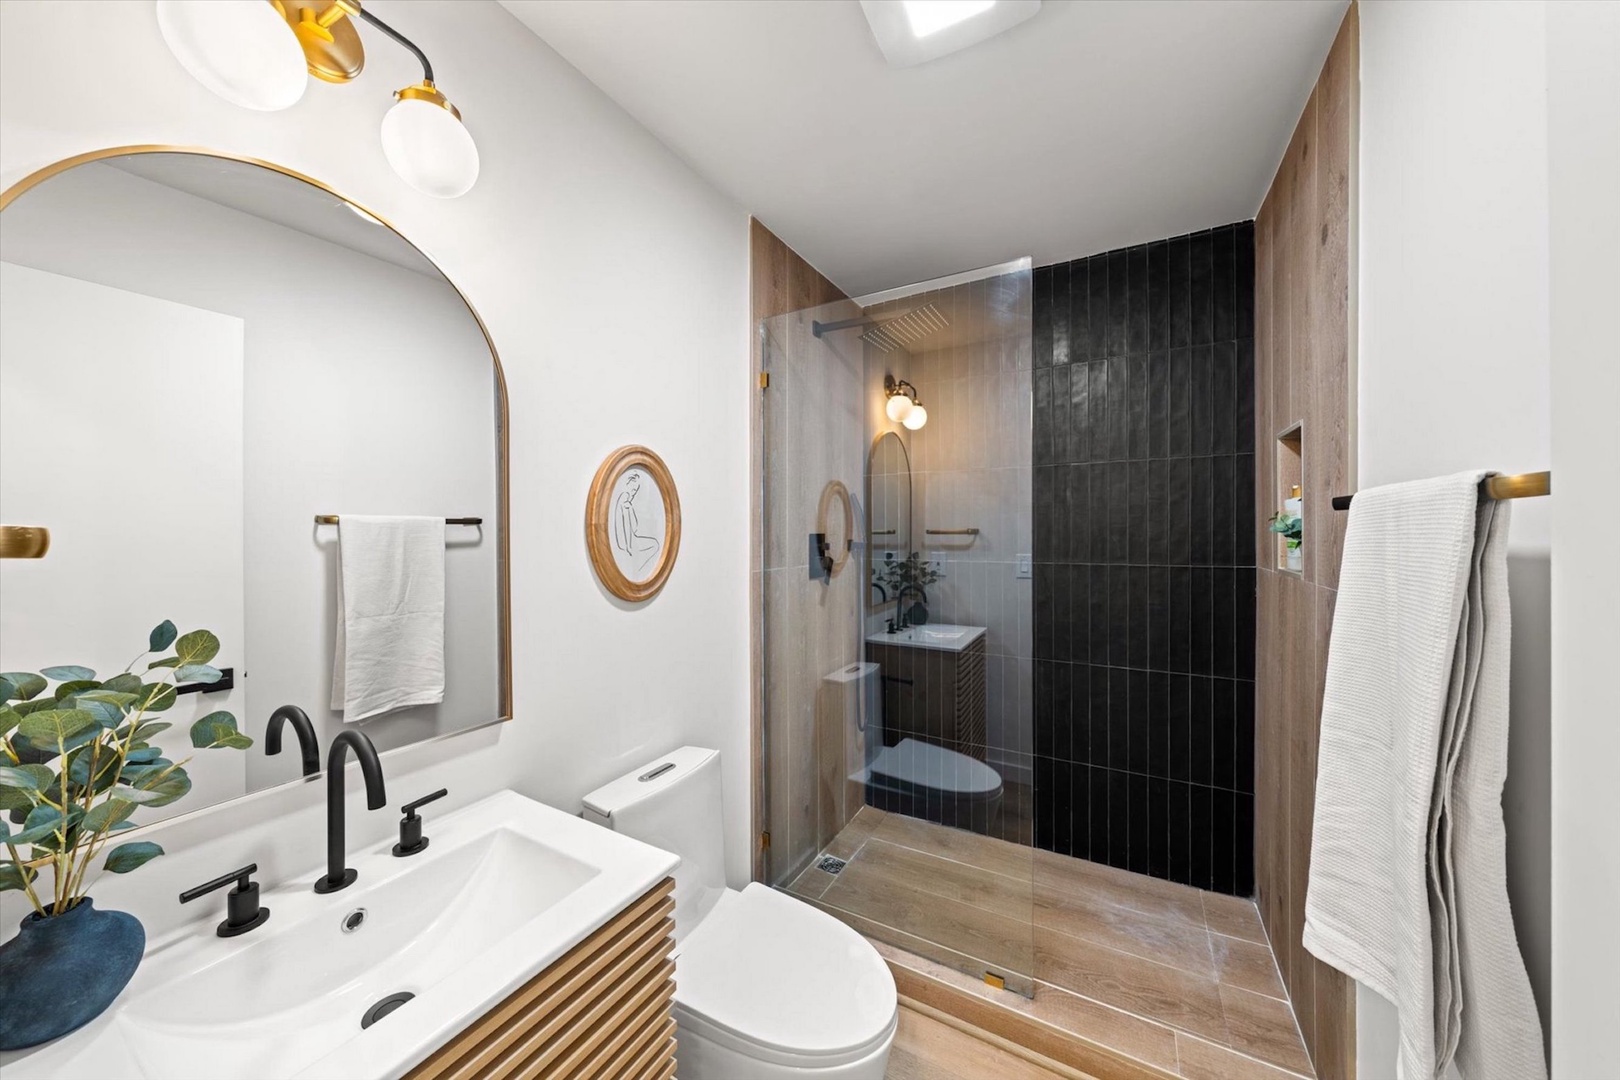 This full bathroom includes a stylish single vanity & glass walk-in shower